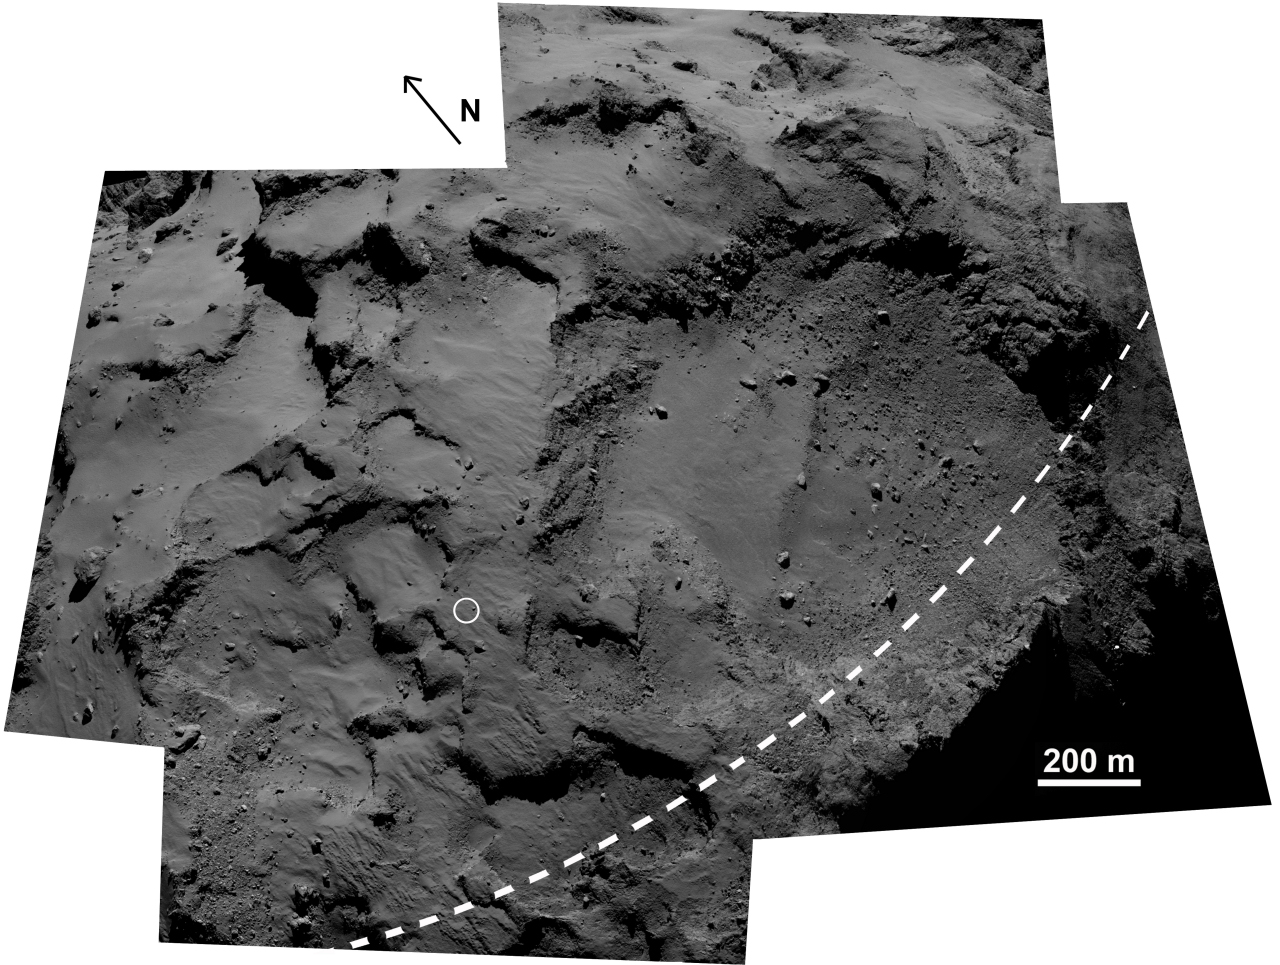 From ESA: " The Agilkia area on comet 67P/Churyumov-Gerasimenko. The circle indicates where Philae touched down for the first time on 12 November 2014. The dashed line marks the comet's equator. The large depression is the Hatmehit region. This image is a composite of five frames from the OSIRIS Narrow Angle Camera, acquired on 14-15 September 2014." Image Credit: ESA/Rosetta/MPS for OSIRIS Team MPS/UPD/LAM/IAA/SSO/INTA/UPM/DASP/IDA